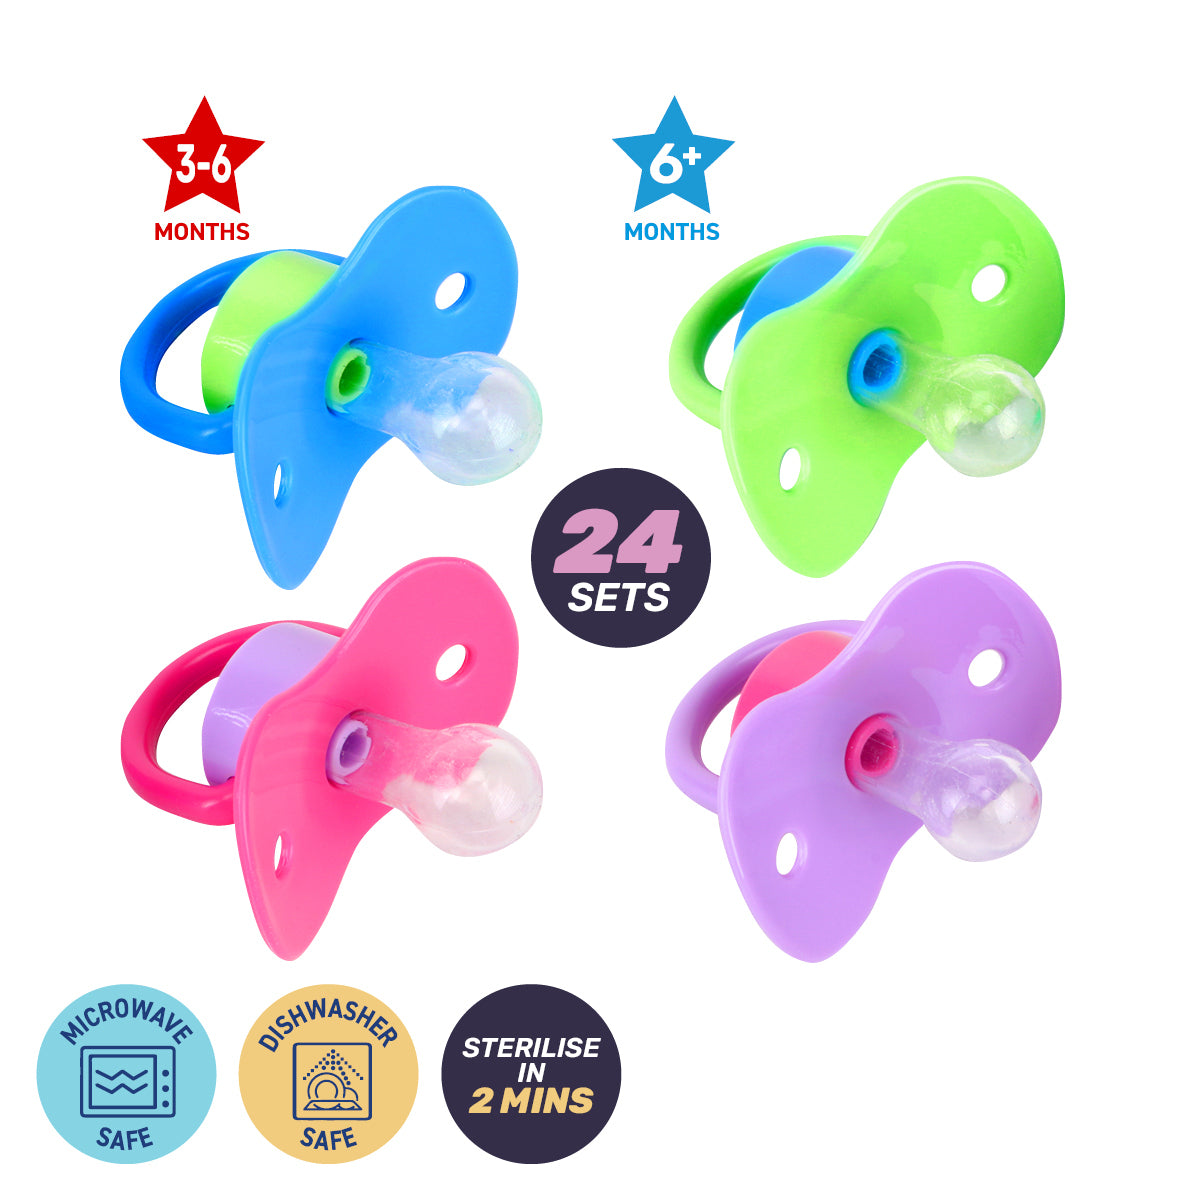 1st Steps 24PCE Cherry Shaped Pacifiers With Sterilising Cases 3-6+ Months